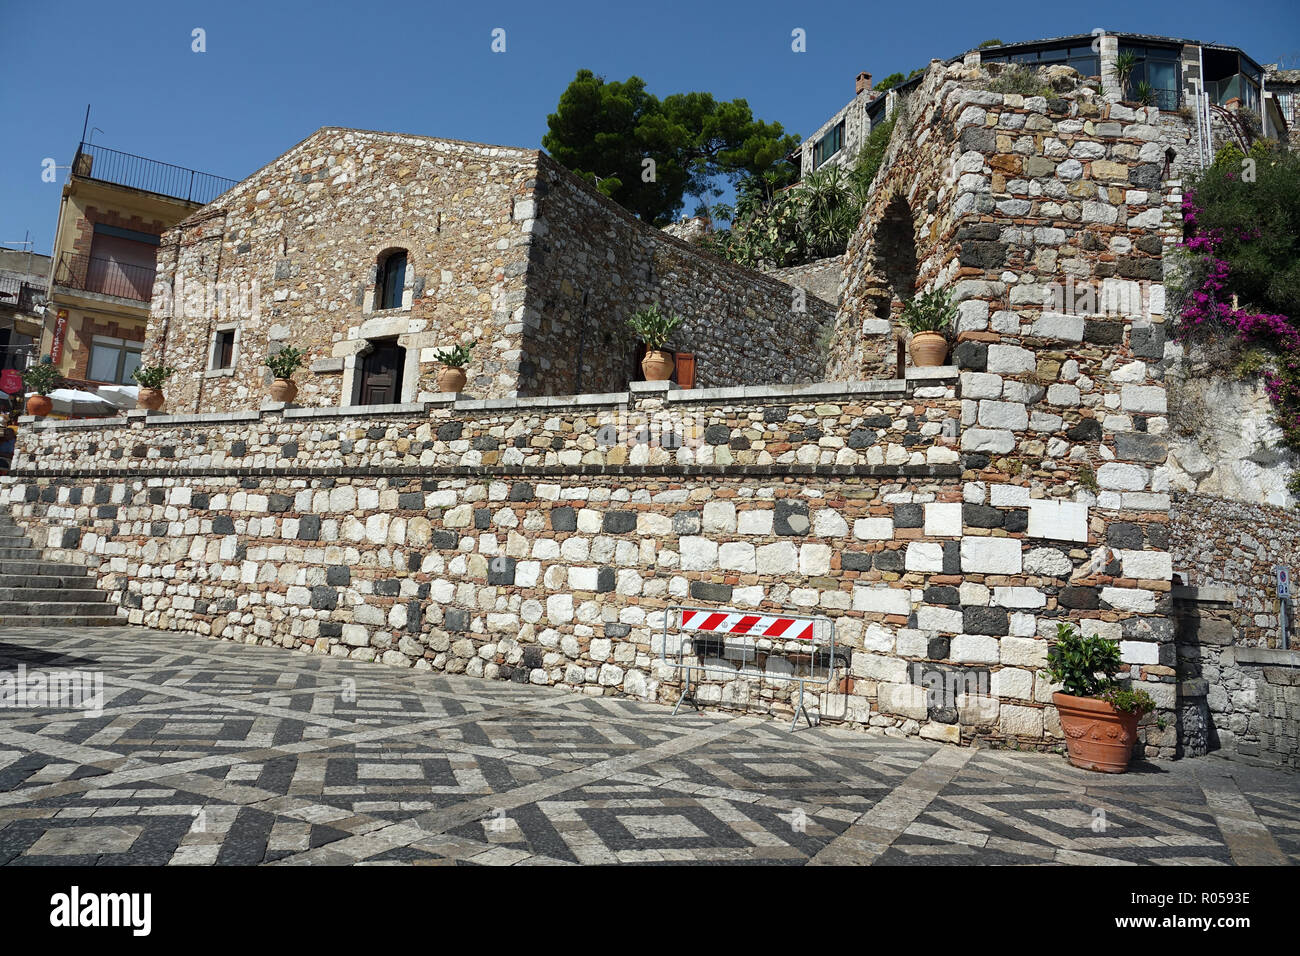 06.09.2018, Italy, Castelmola: Different colored stones are built in patterns on Piazza Sant'Antonio in the mountain village of Castelmola. Castelmola is located on the summit of Monte Tauro and is part of the association "I borghi più belli d'Italia" (The most beautiful places in Italy). Photo: Alexandra Schuler / dpa | usage worldwide Stock Photo